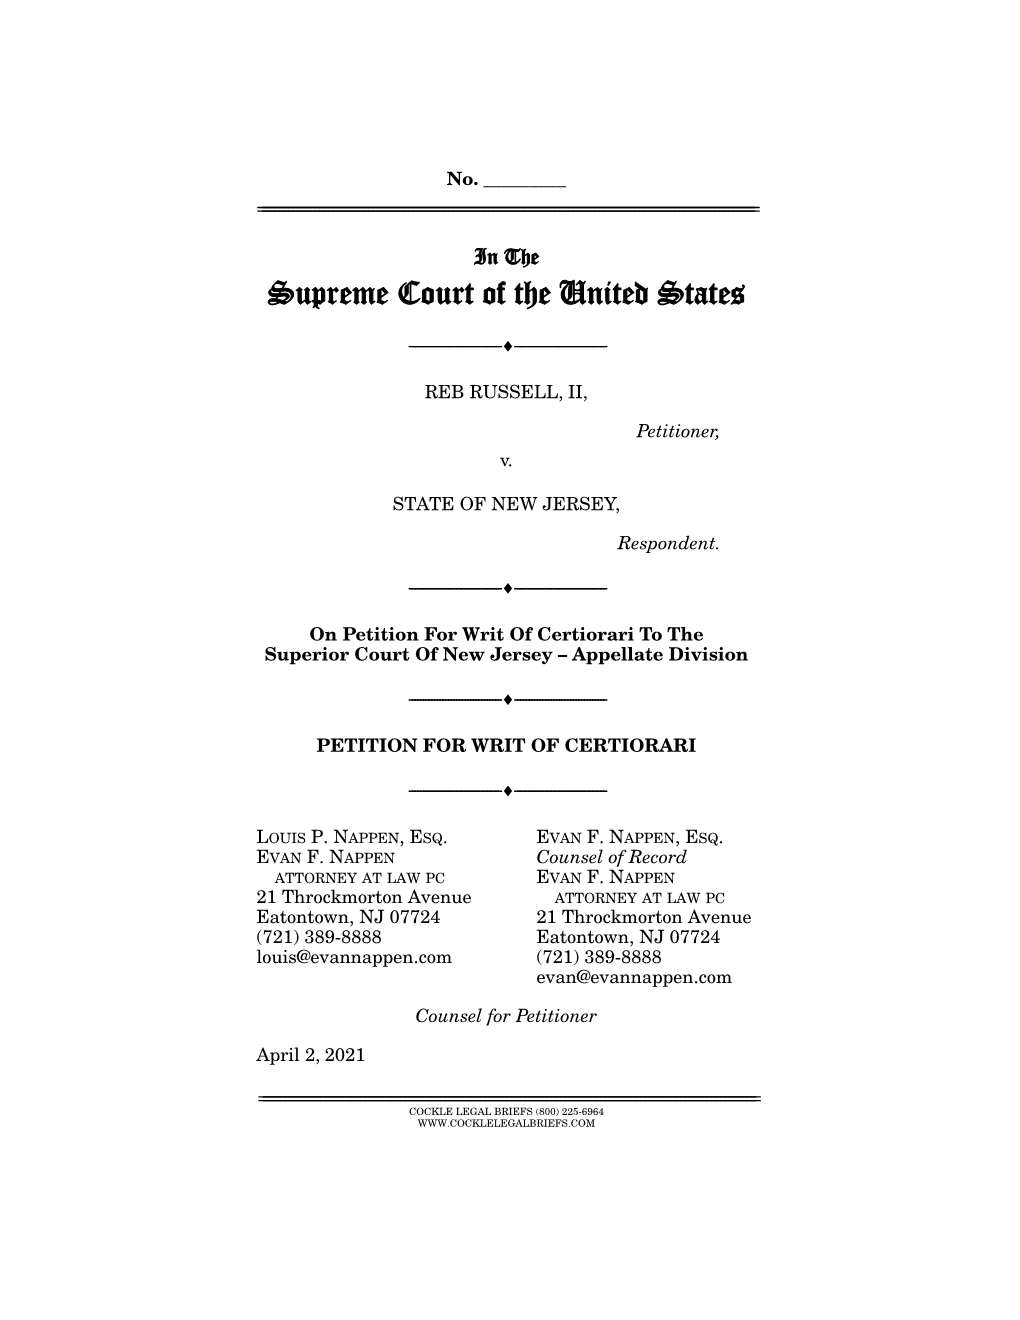 Petition for Writ of Certiorari to the Superior Court of New Jersey – Appellate Division